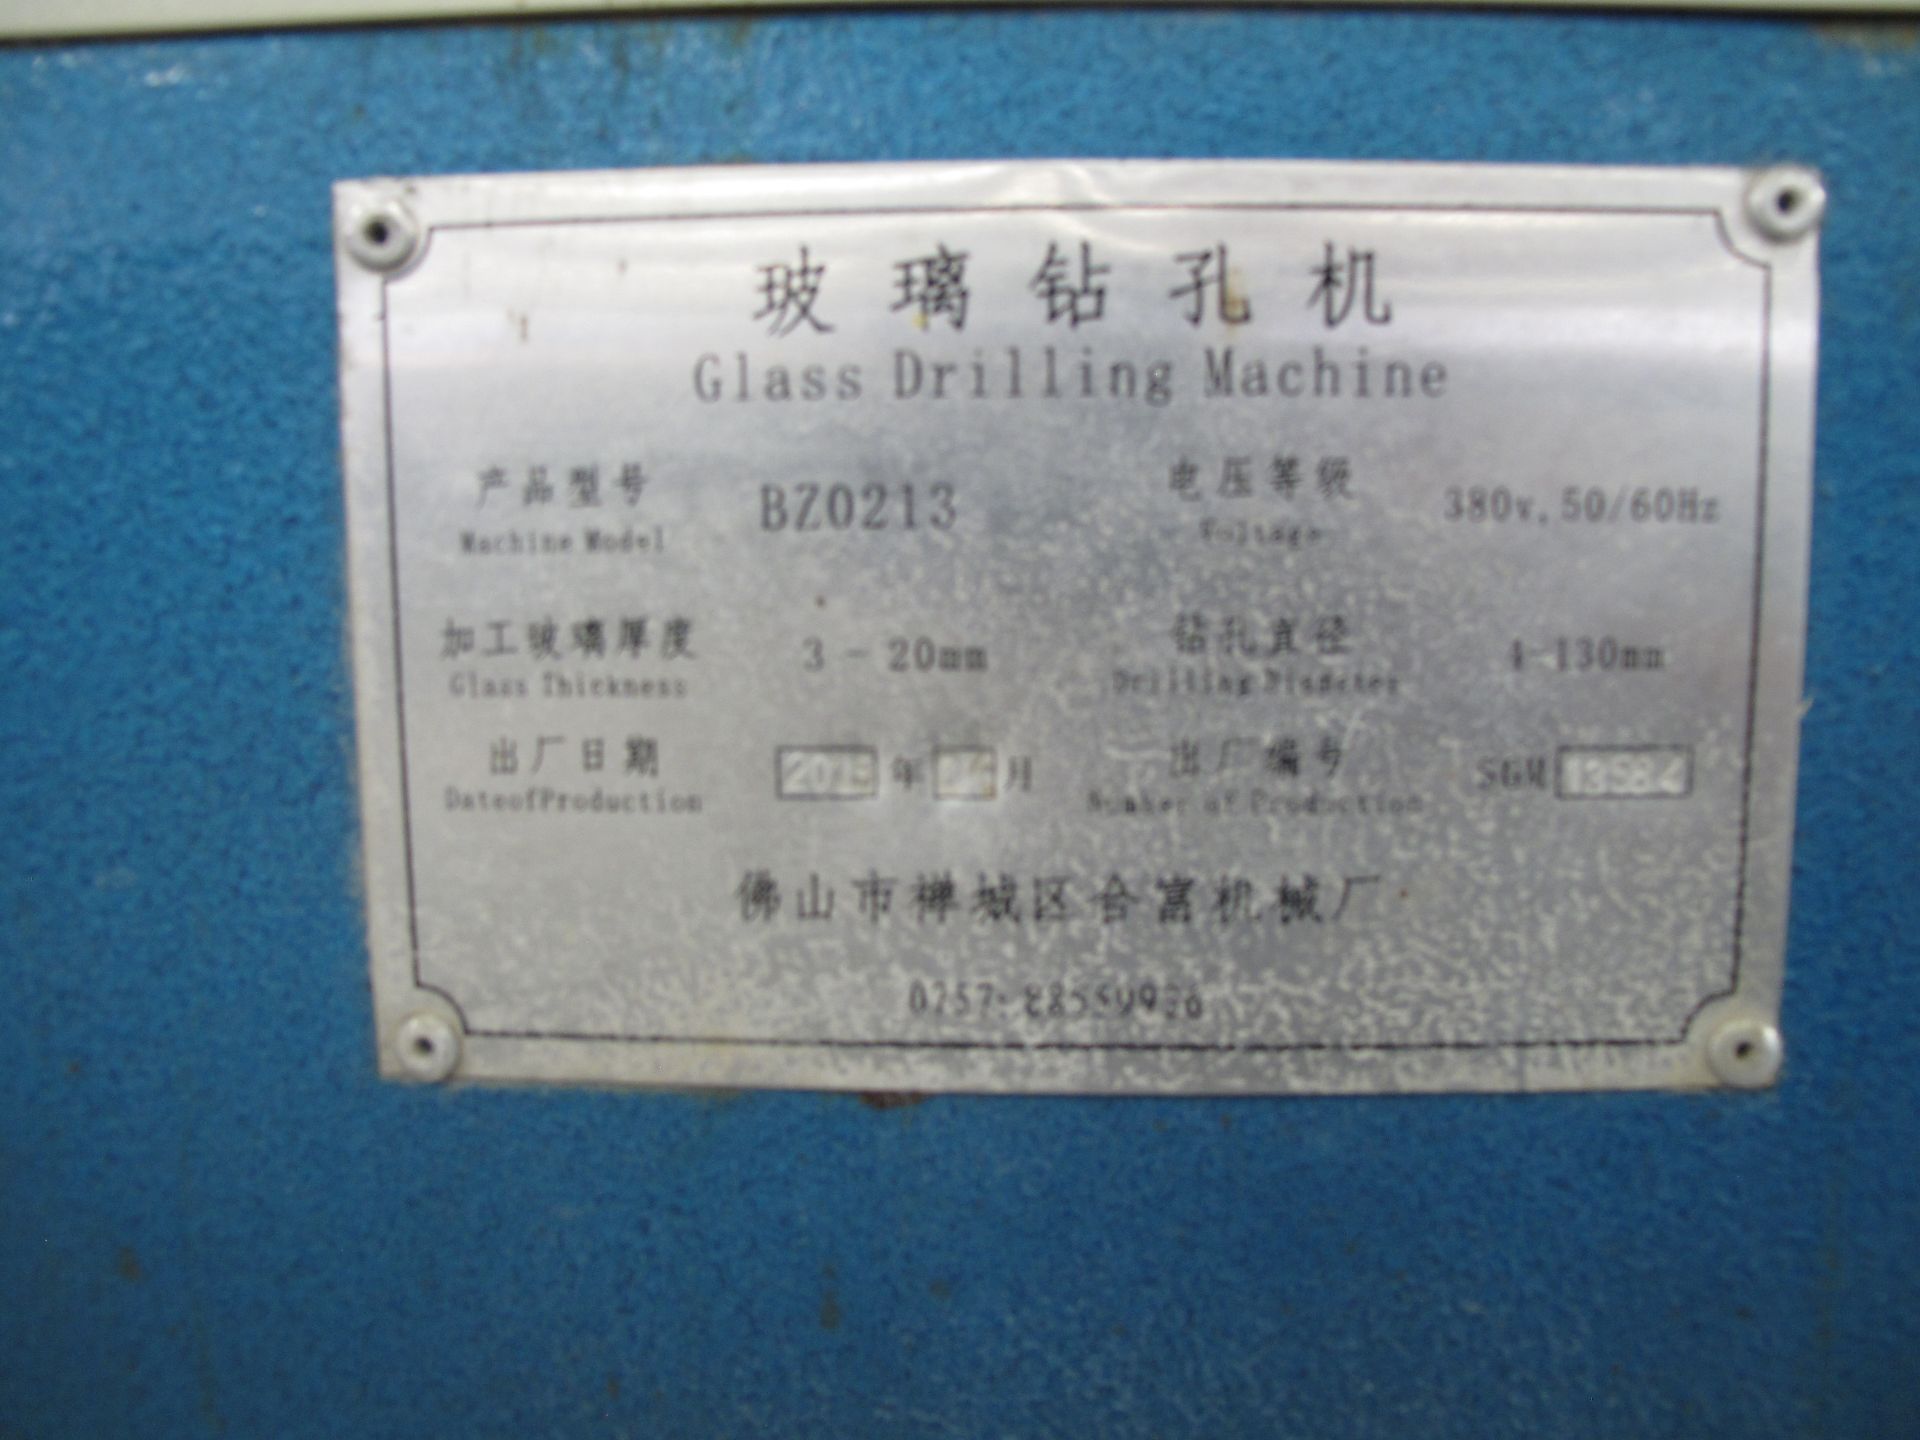 BEIJIANG, BZ0213AL, AUTOMATIC GLASS DRILLING MACHINE - Image 10 of 10